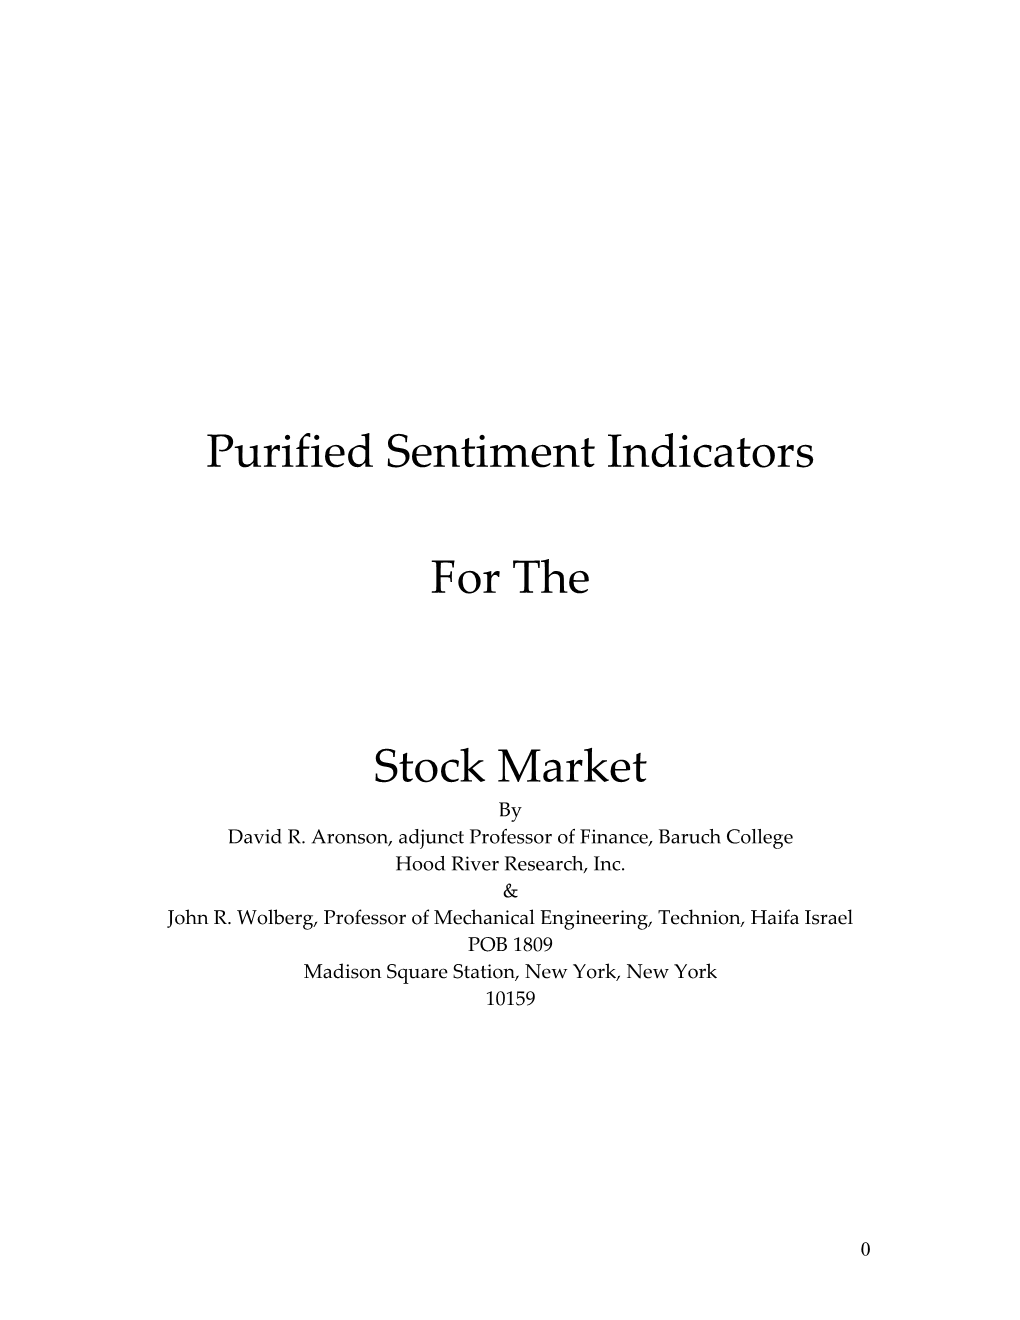 Purified Sentiment Indicators for the Stock Market